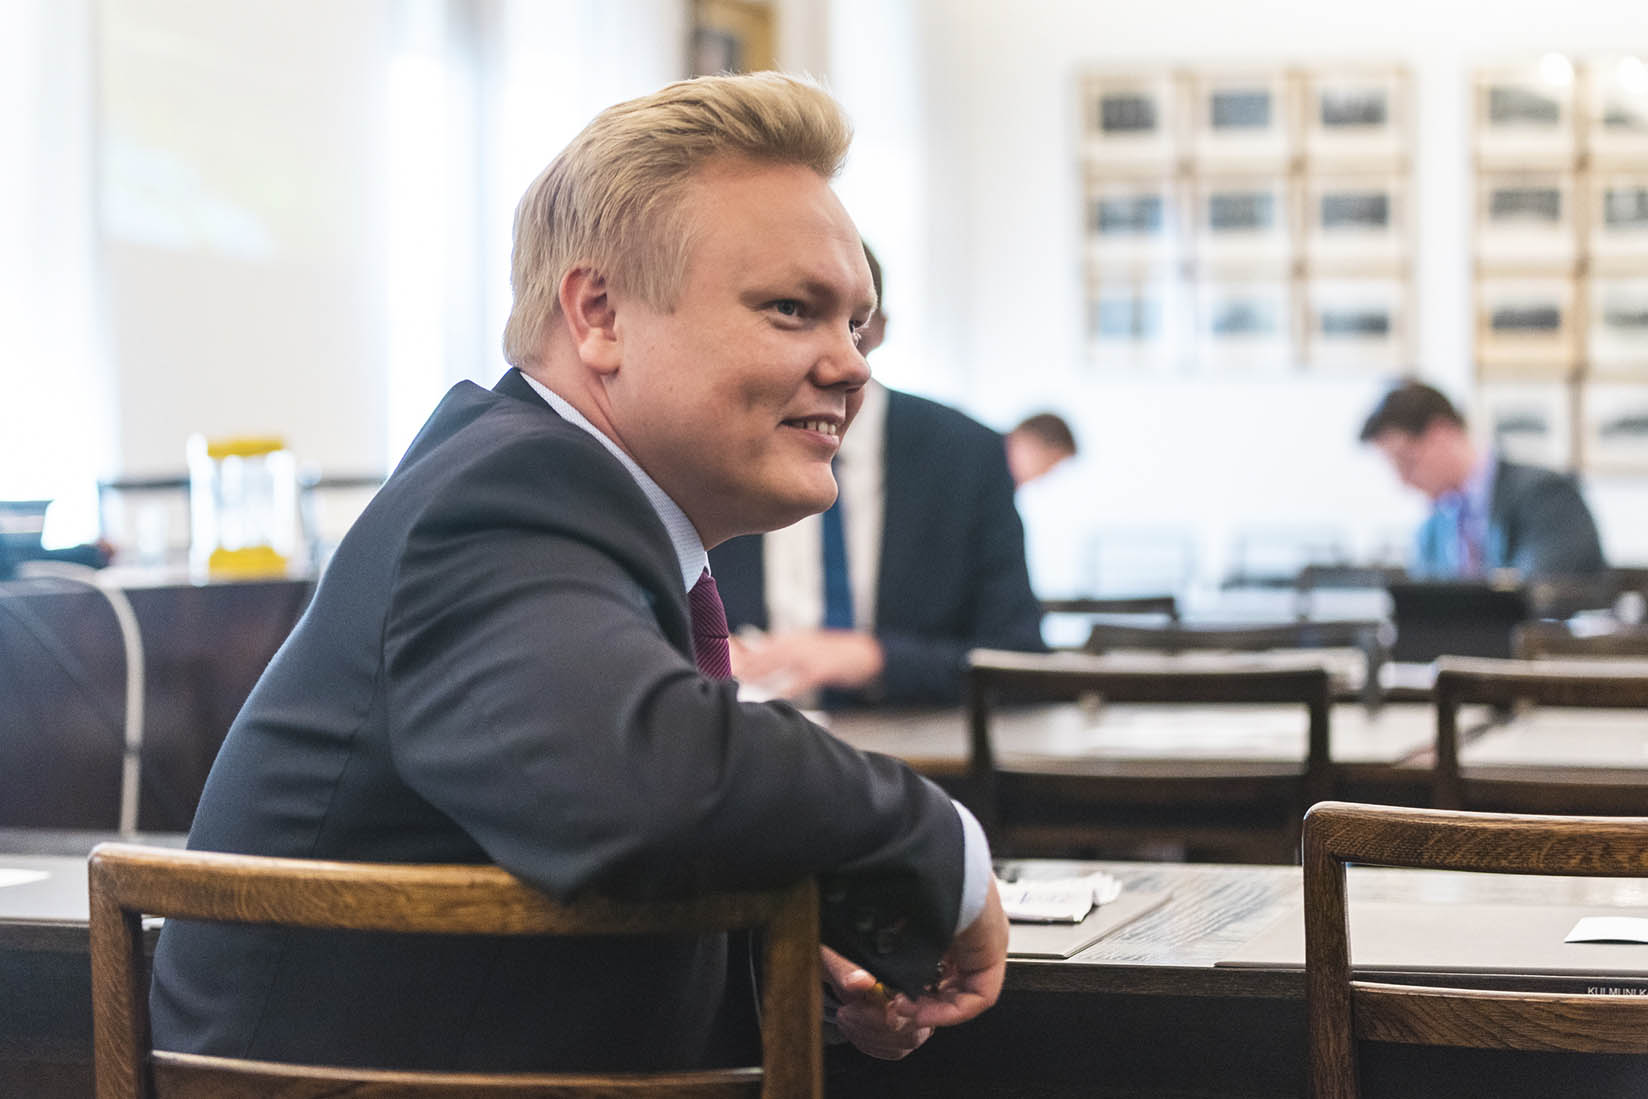 ’It’s not that Finns chop down the trees and leave the site as is. Forest is always regenerated by planting seedlings or sowing,’ says Finland’s new Minister of Agriculture and Forestry Antti Kurvinen. Photo: Johannes Erkkilä / Keskusta